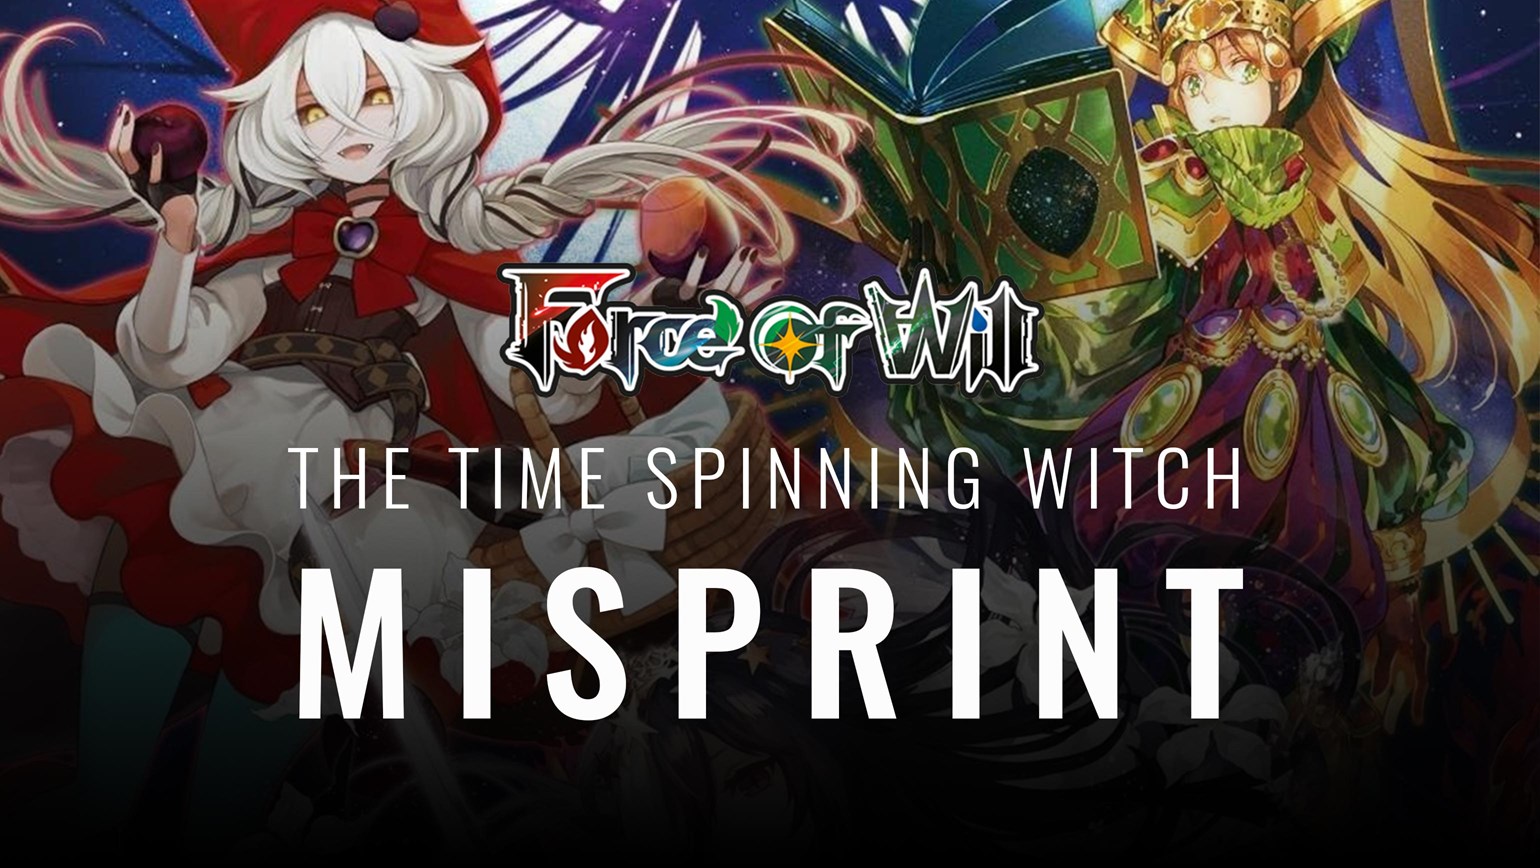 Force of Will Announces Time Spinning Witch Misprint